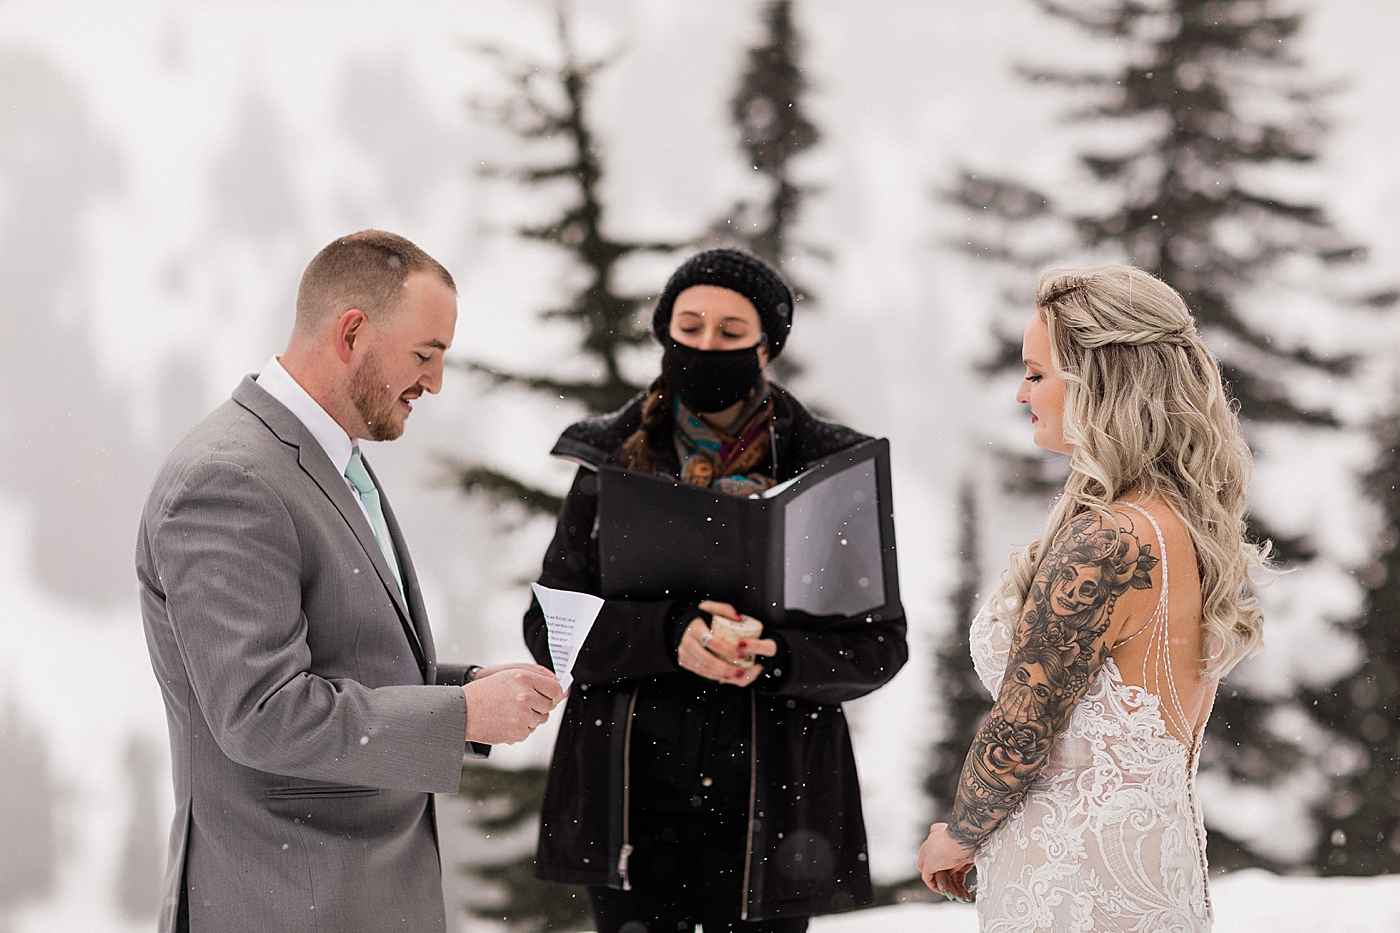 Groom reading vows. Photo by Megan Montalvo Photography.